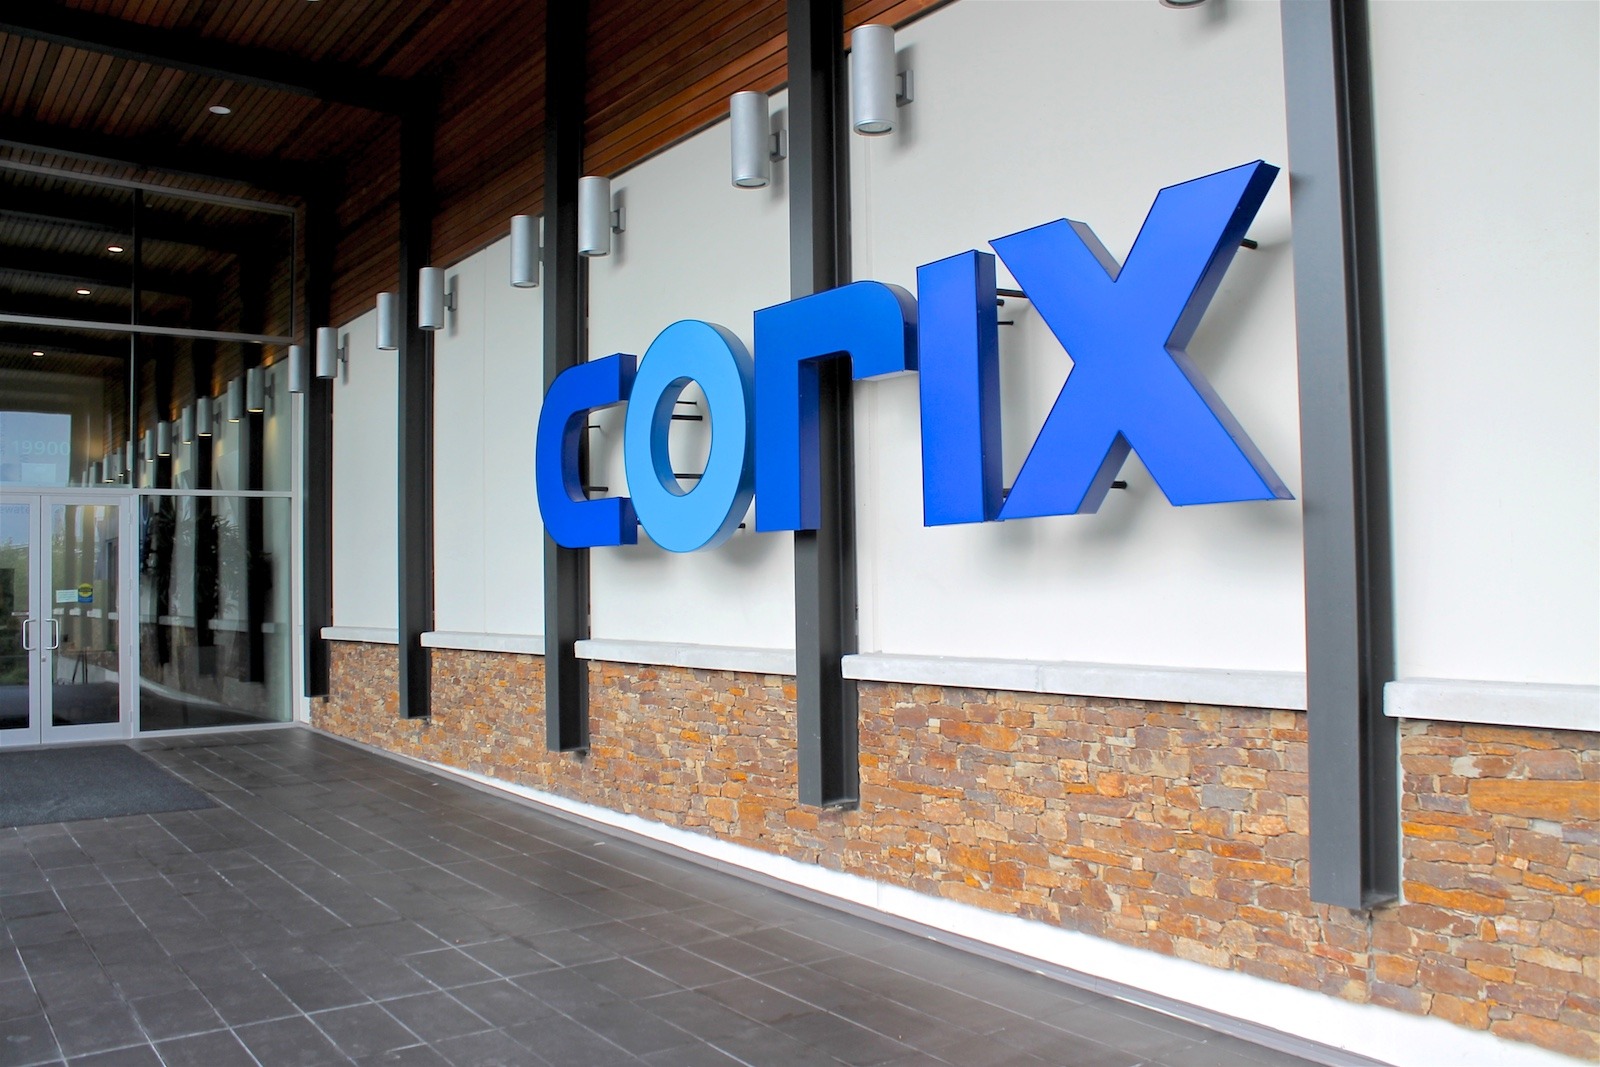 Office Interiors: Corix Water Products Head Office. Completed March 2013